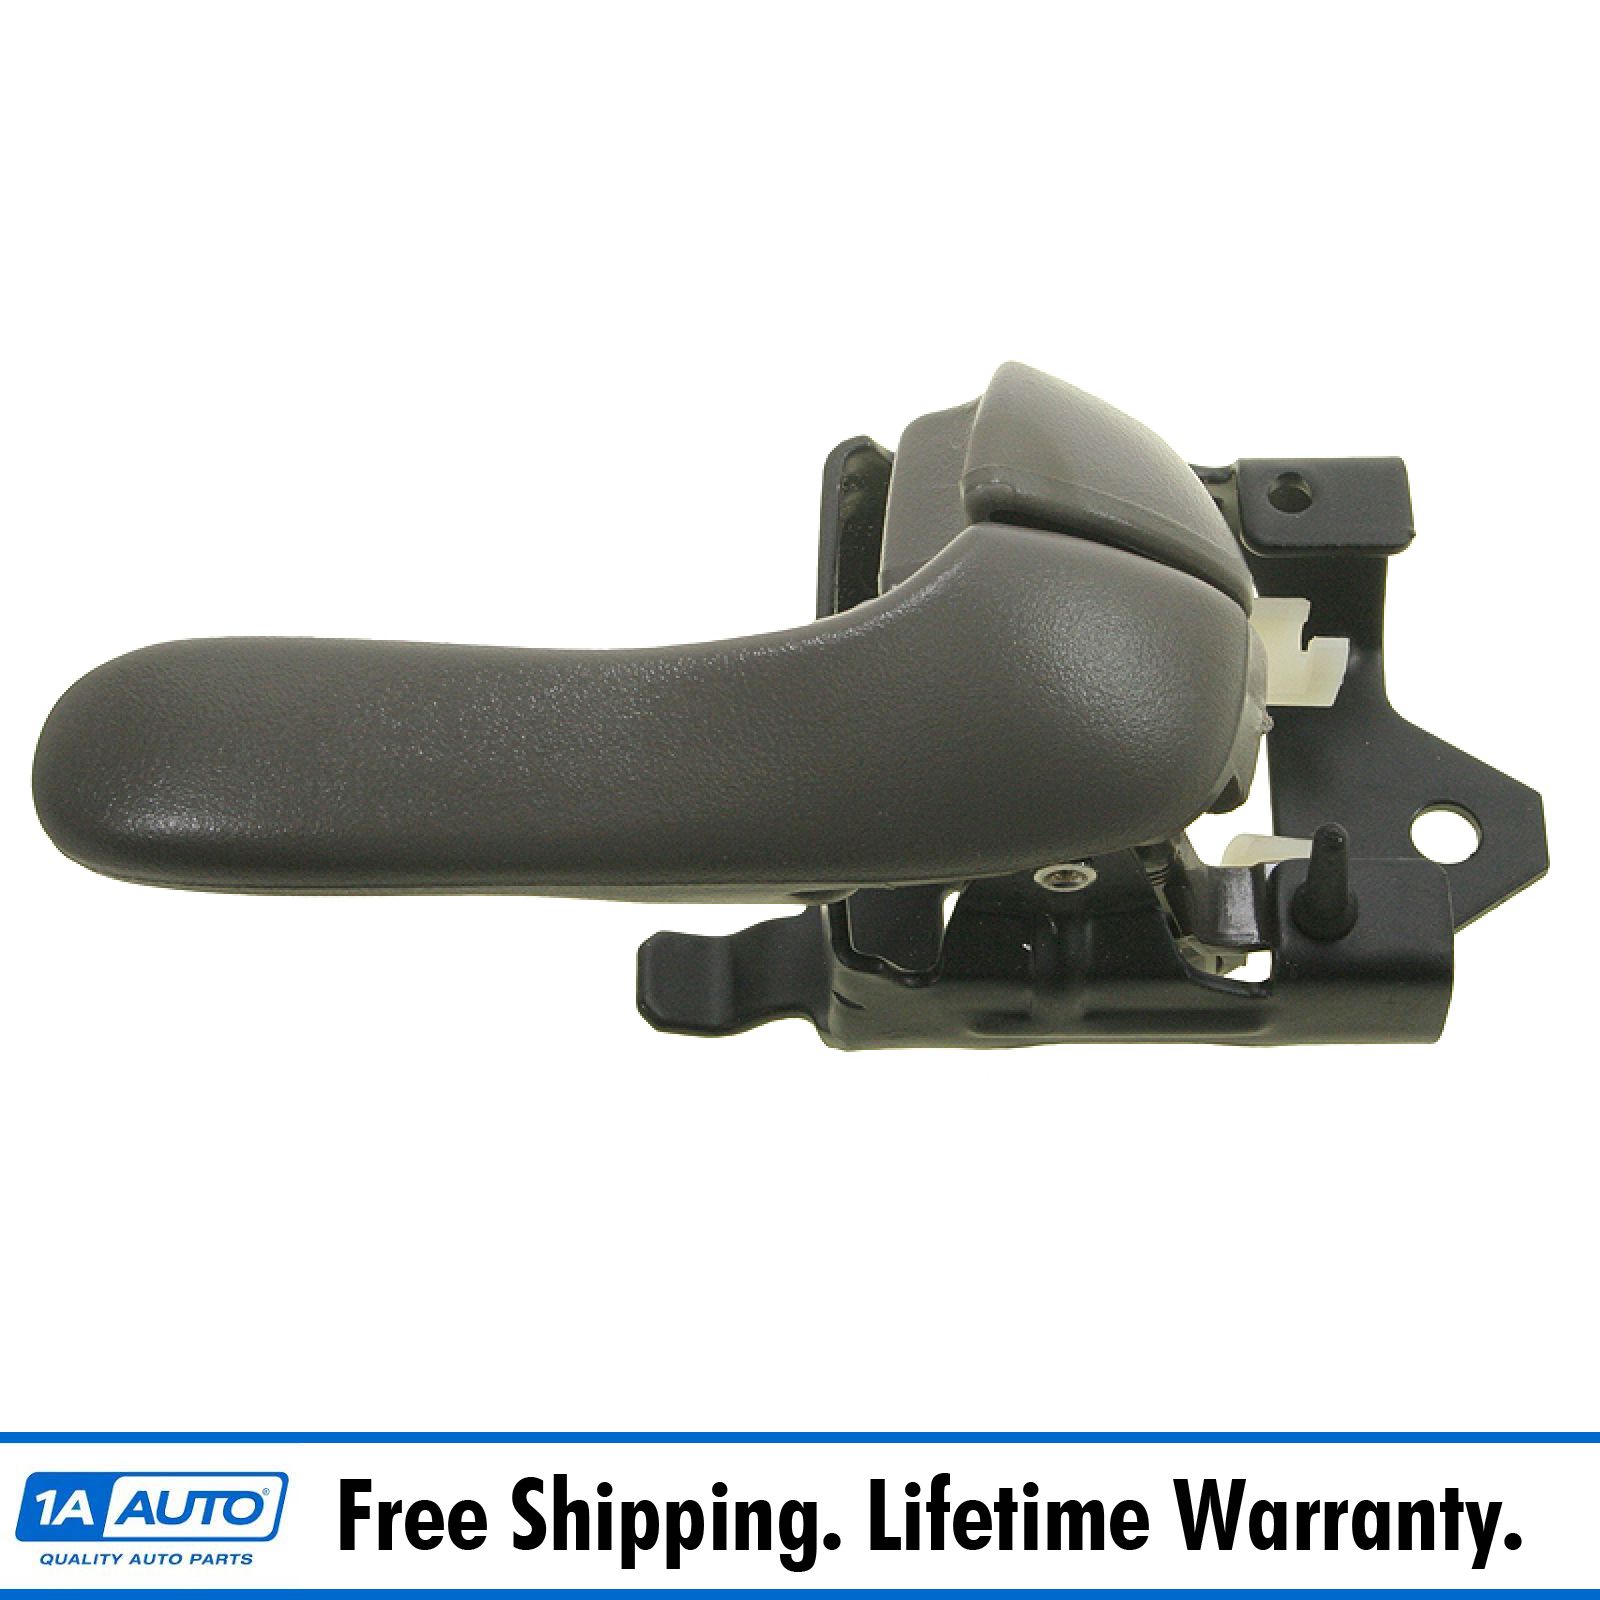 Details About Gray Interior Inside Door Handle Passenger Side Rh Right For 00 05 Chevy Impala